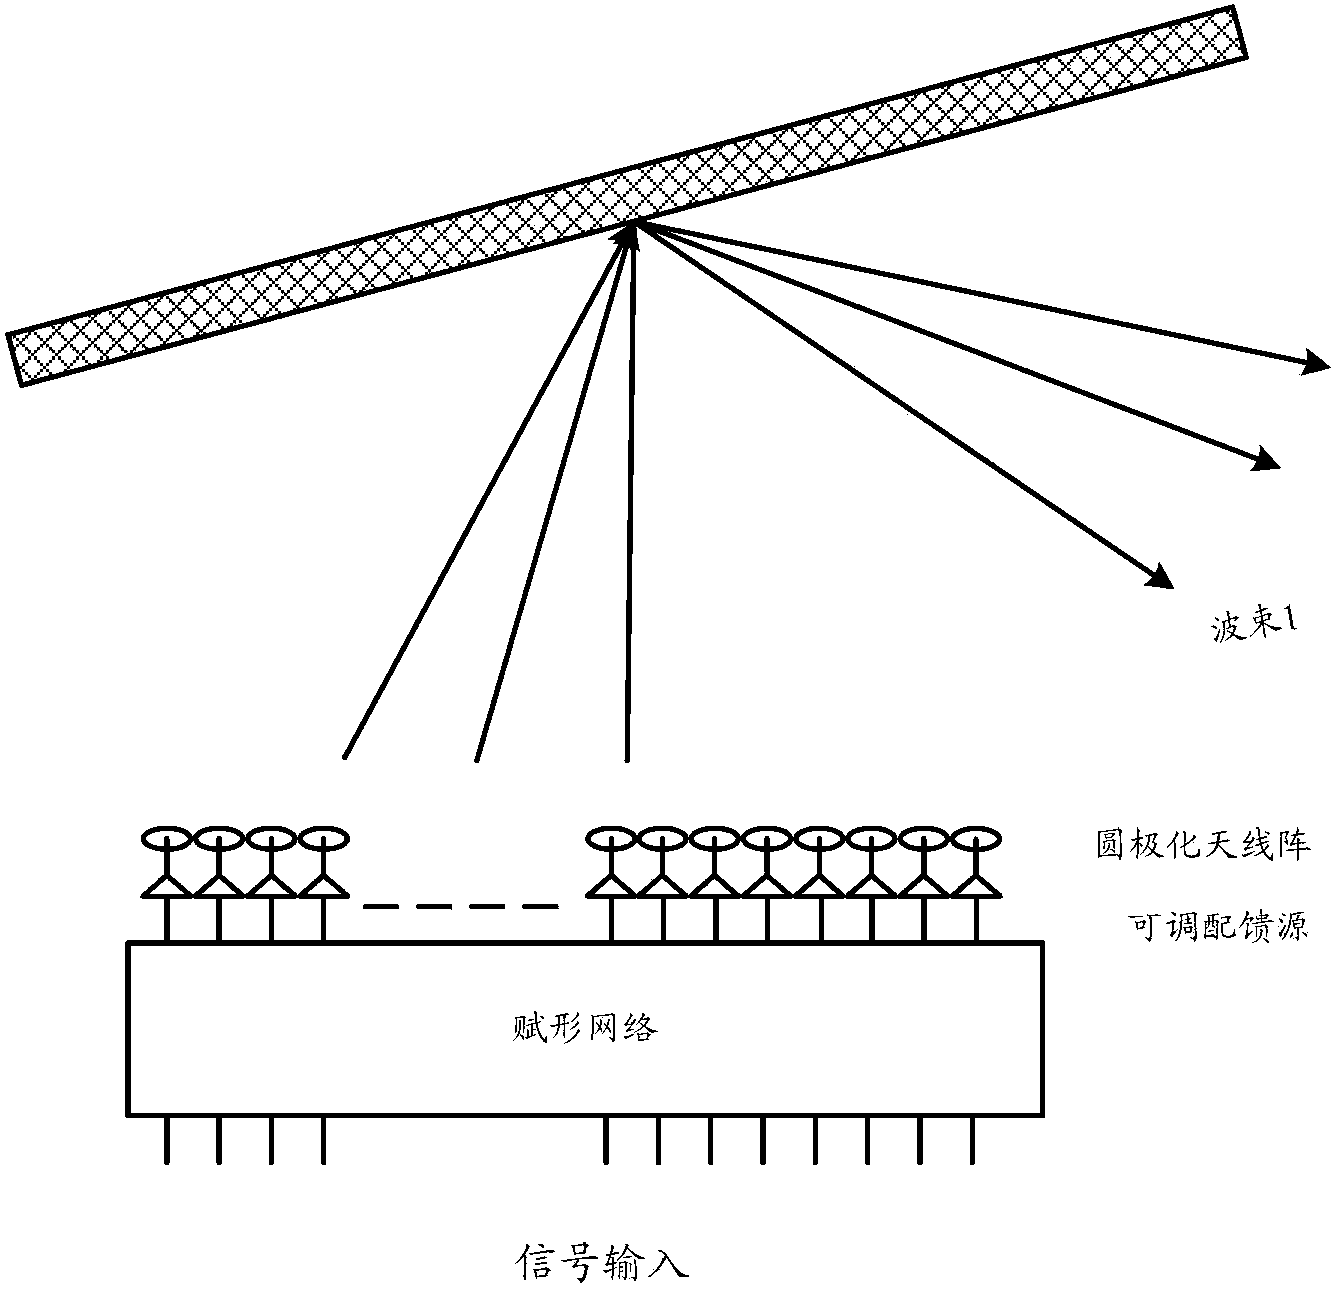 Switching method and device in satellite communication system